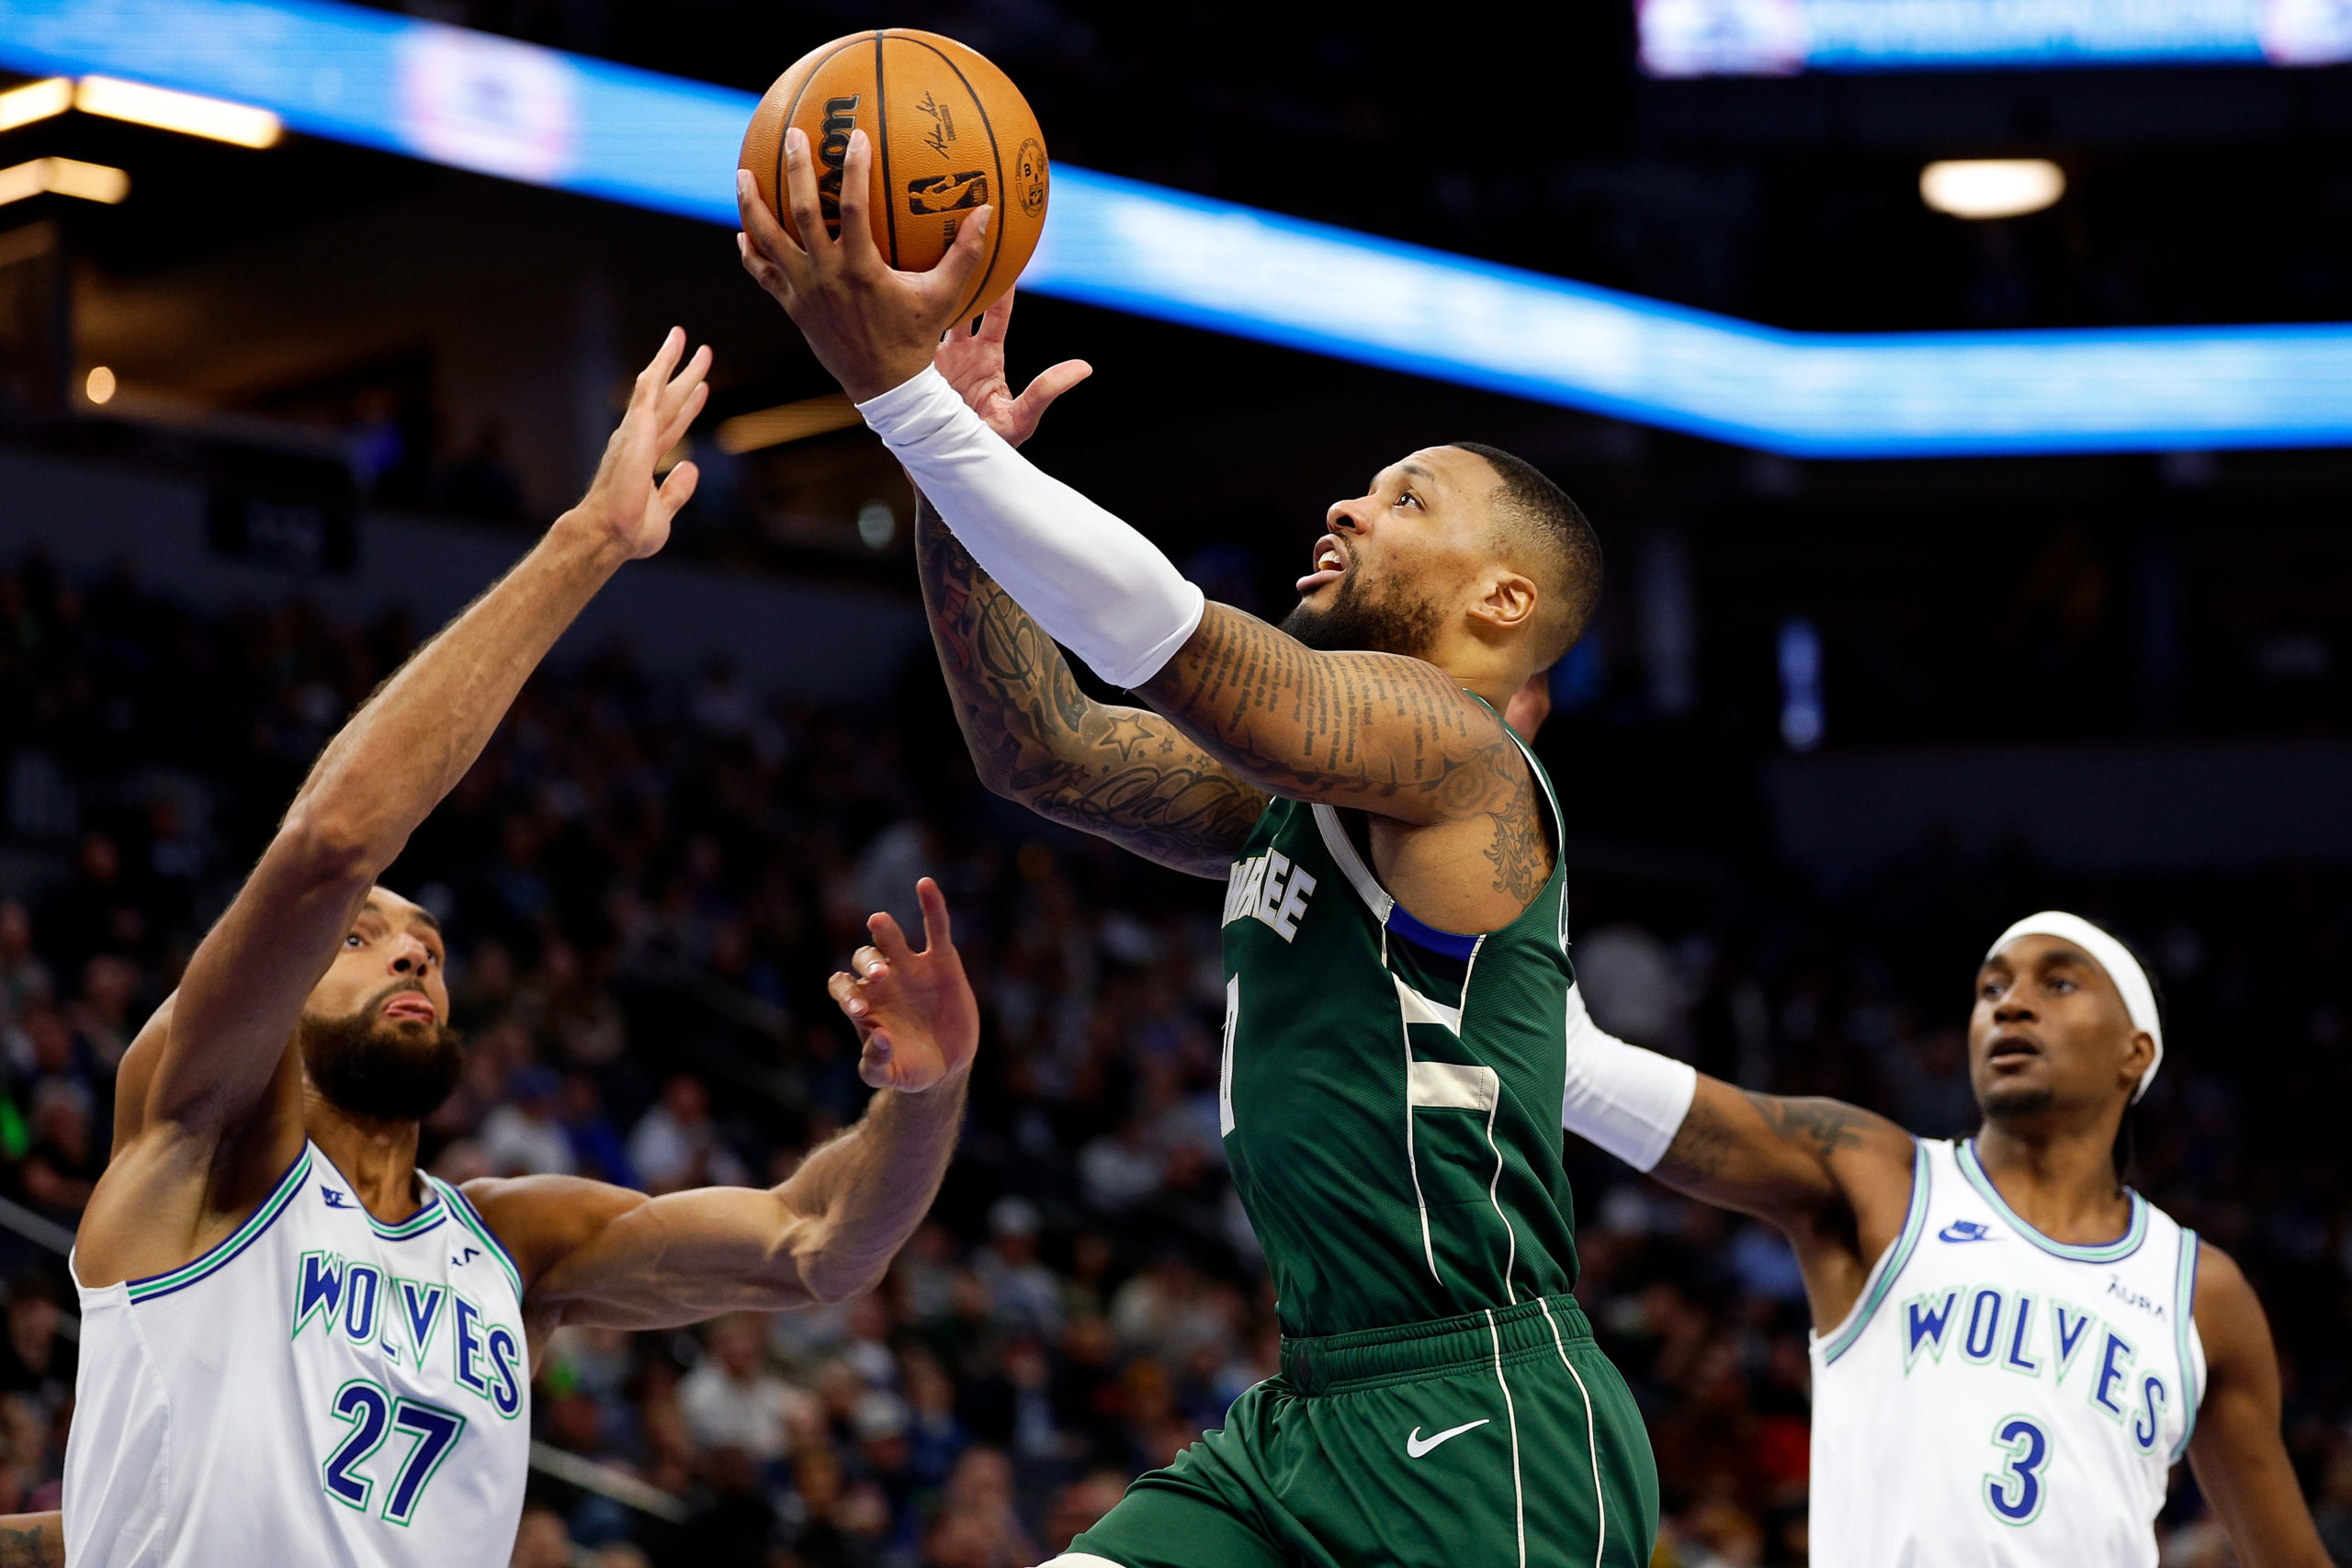 MINNEAPOLIS, MINNESOTA - FEBRUARY 23: Damian Lillard #0 of the Milwaukee Bucks goes up for a shot against Rudy Gobert #27 of the Minnesota Timberwolves in the third quarter at Target Center on February 23, 2024 in Minneapolis, Minnesota. The Bucks defeated the Timberwolves 112-107. David Berding/Getty Images